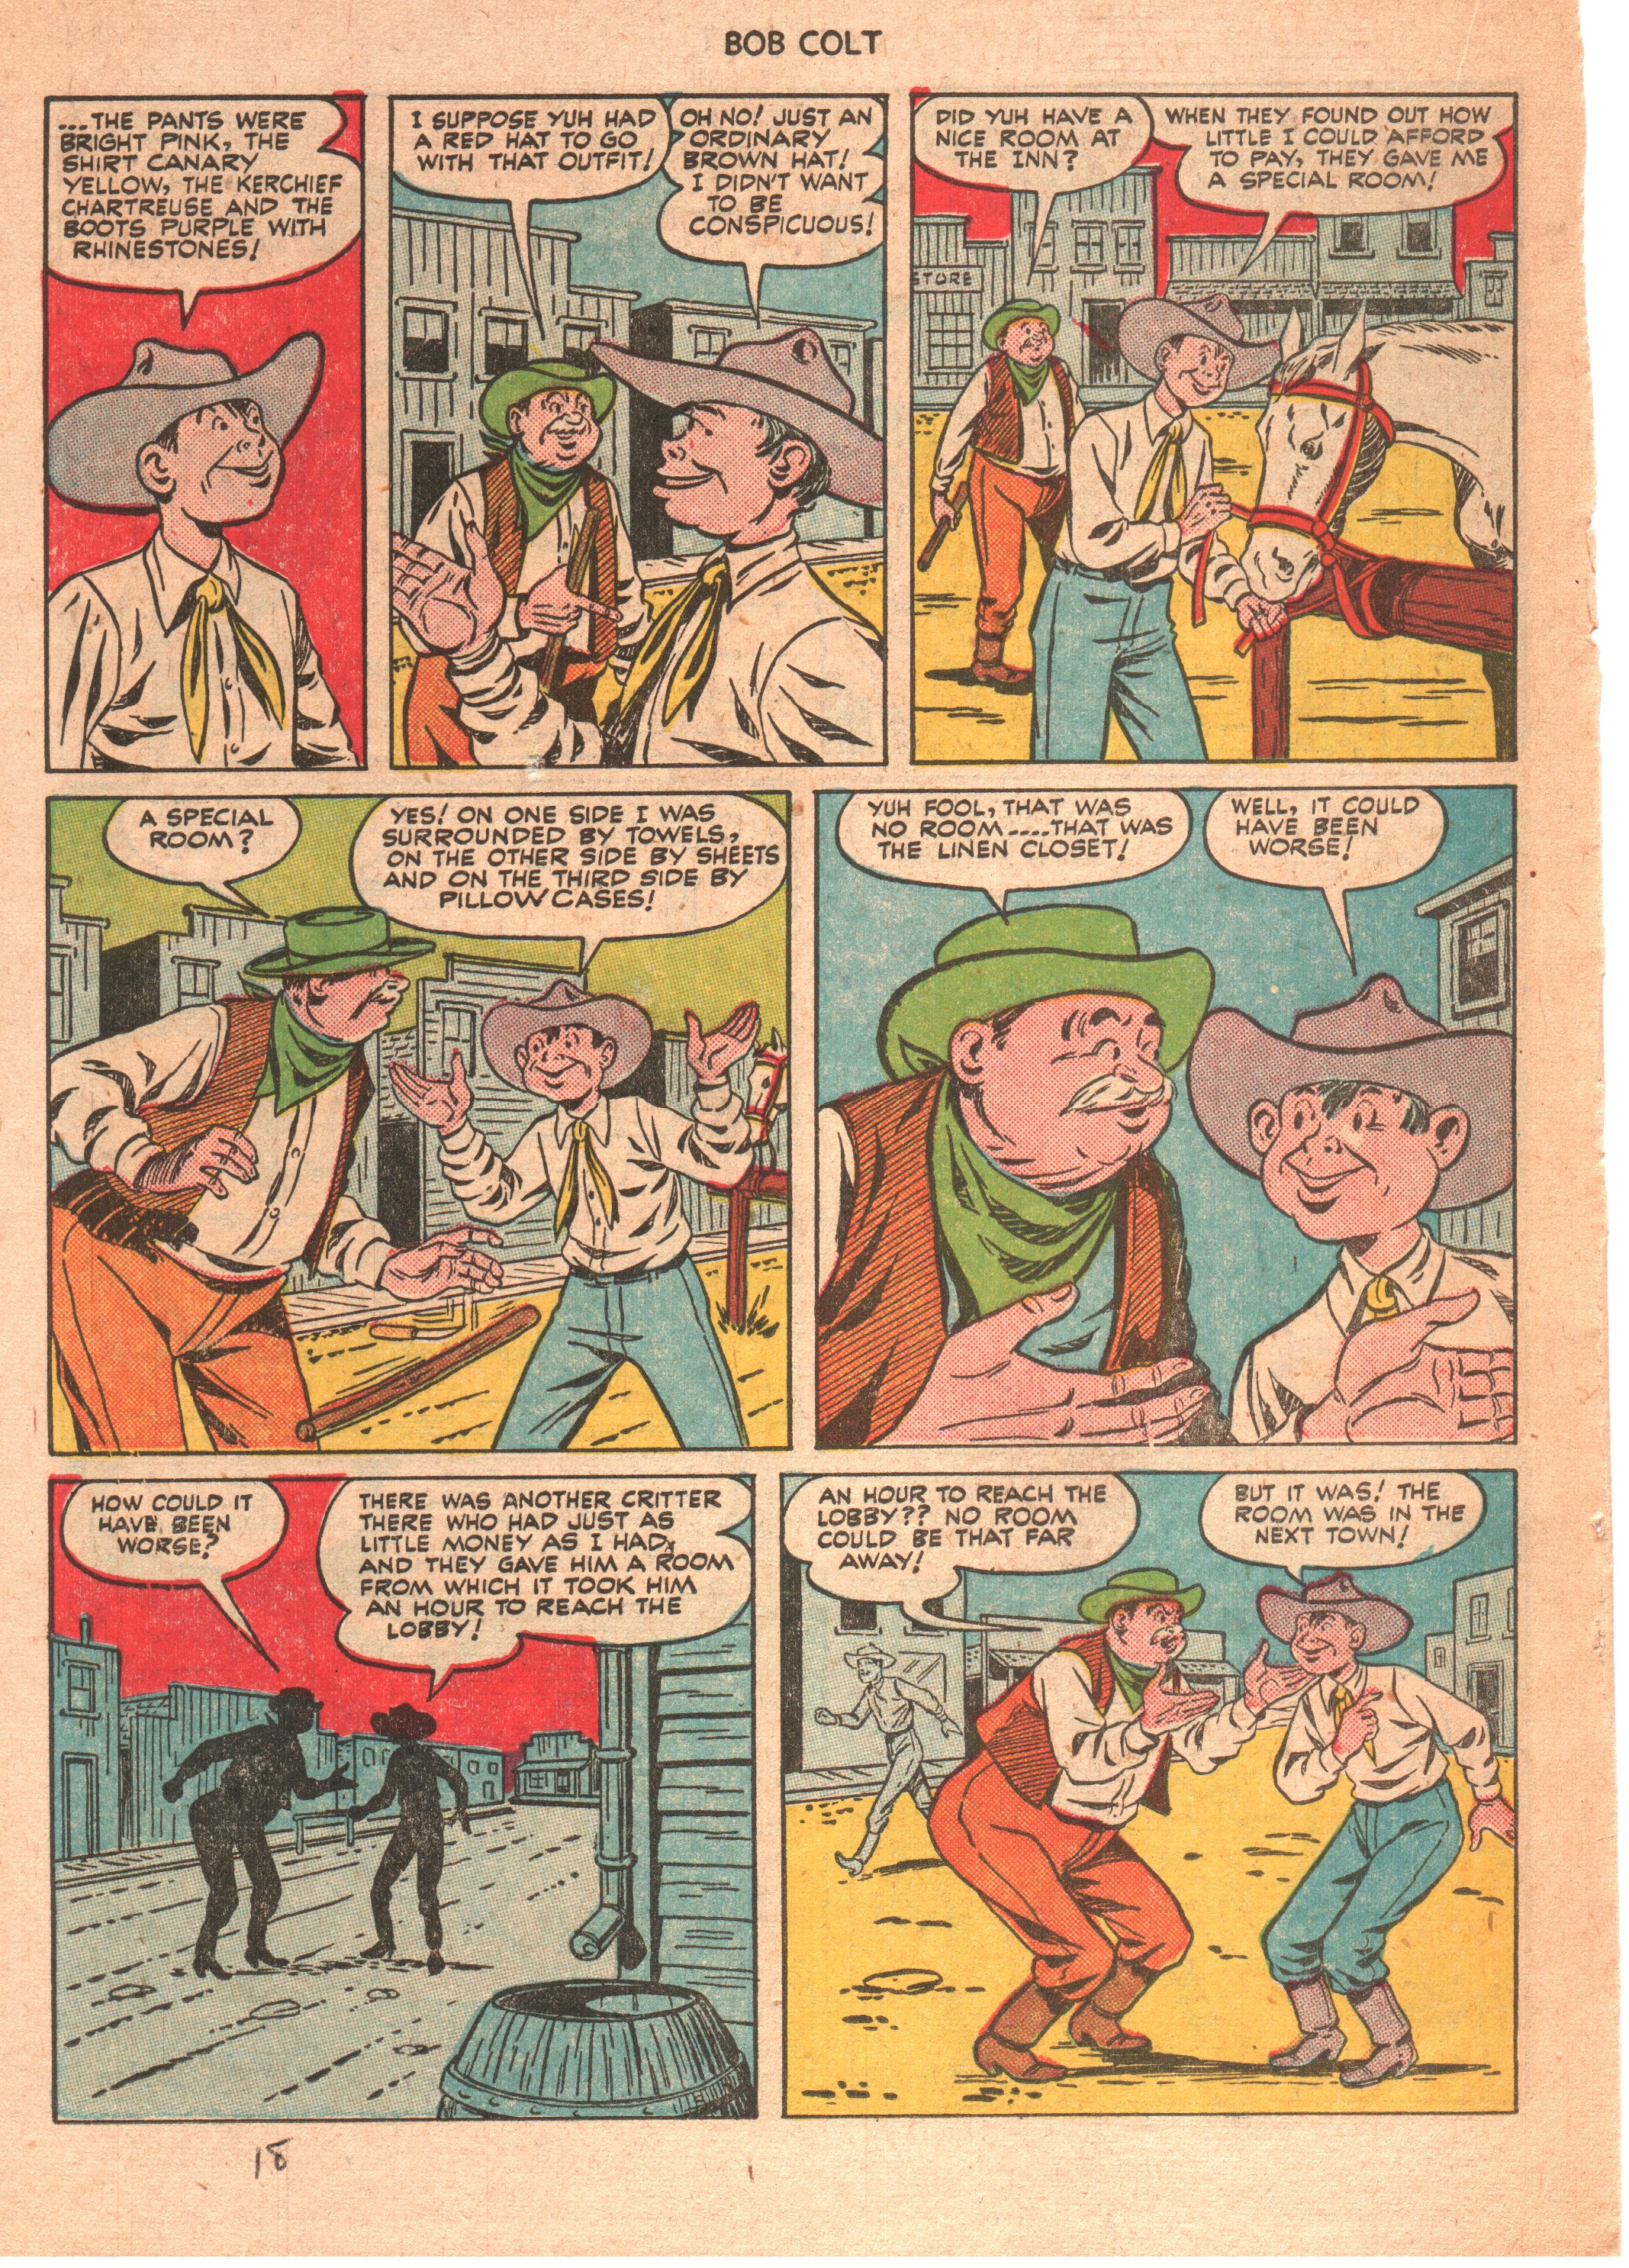 Read online Bob Colt Western comic -  Issue #4 - 18